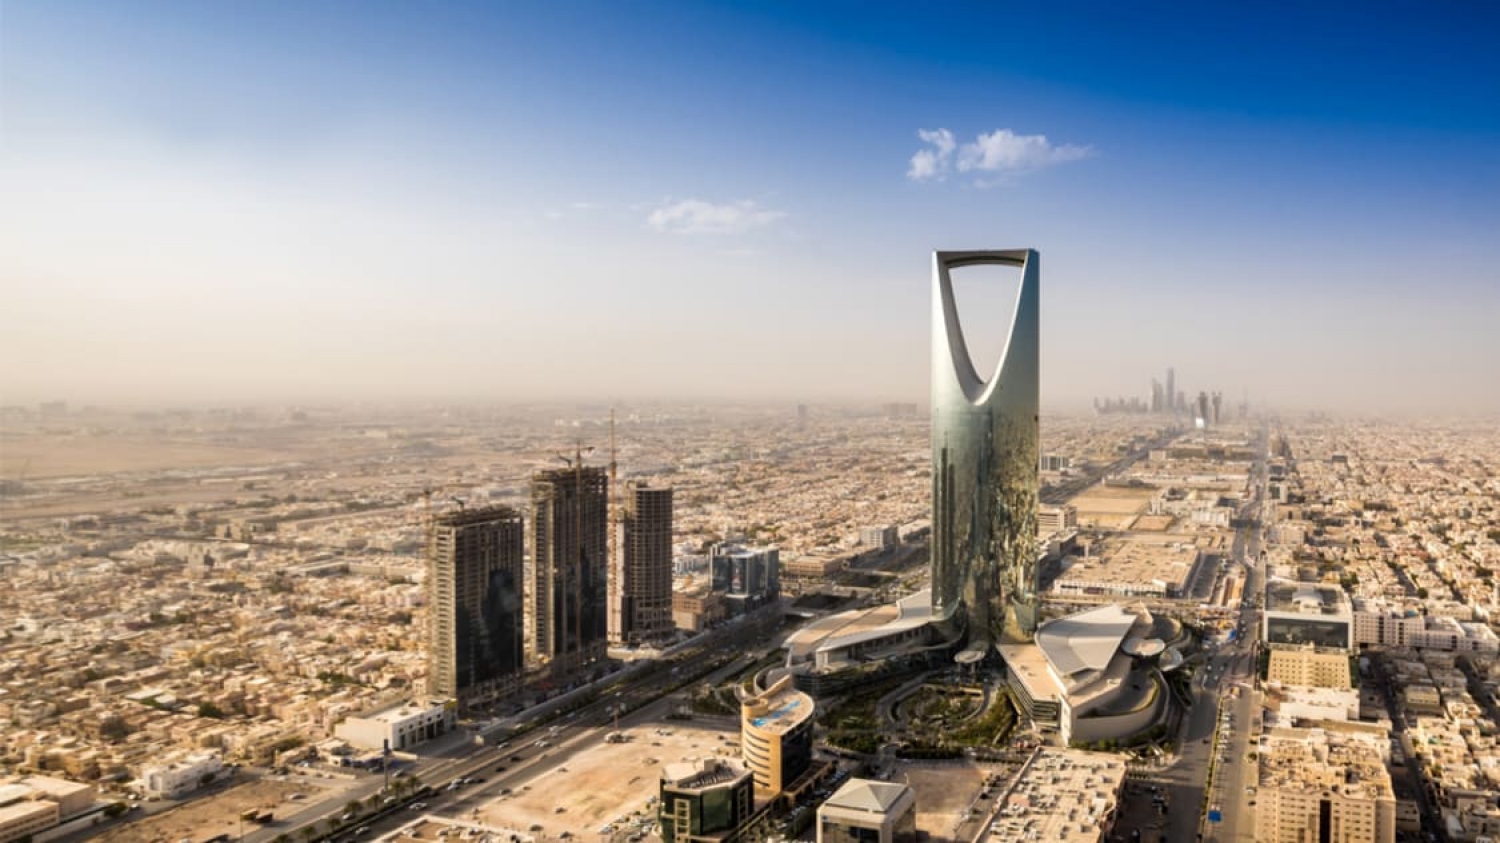 5 steps to start a business in Saudi Arabia for foreigners?